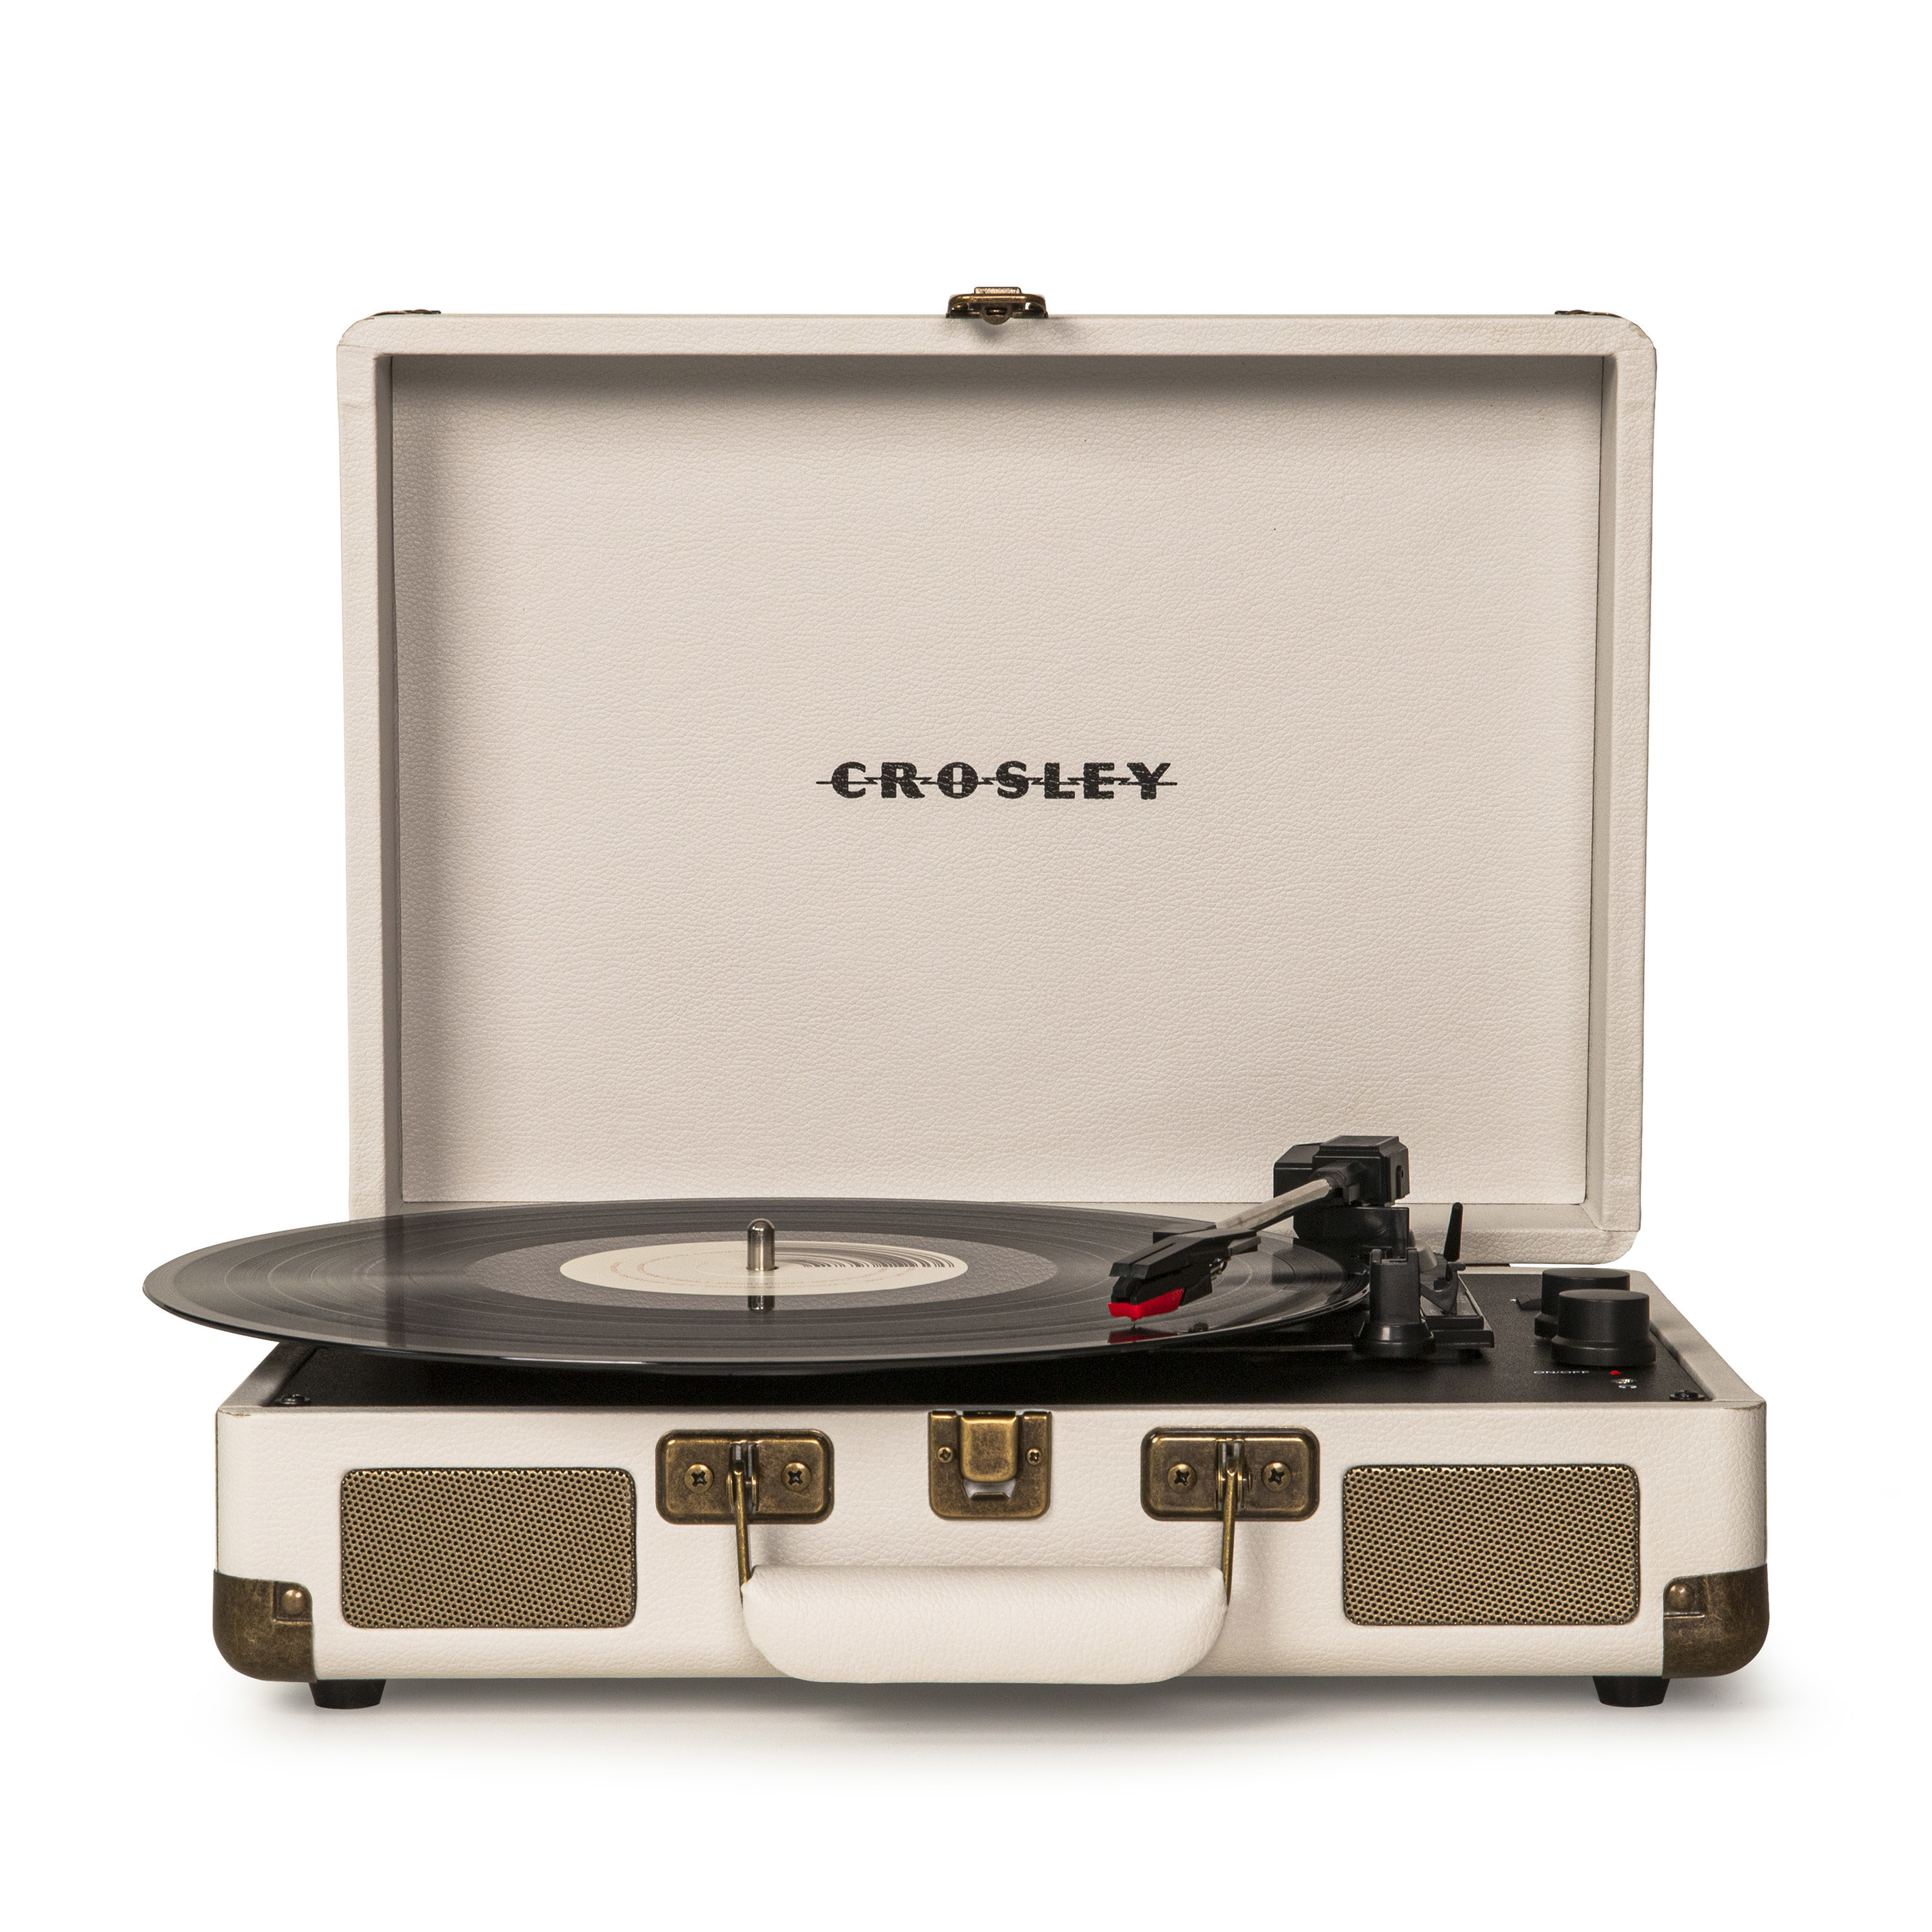 cream colored crosley record player shaped like a small suitcase